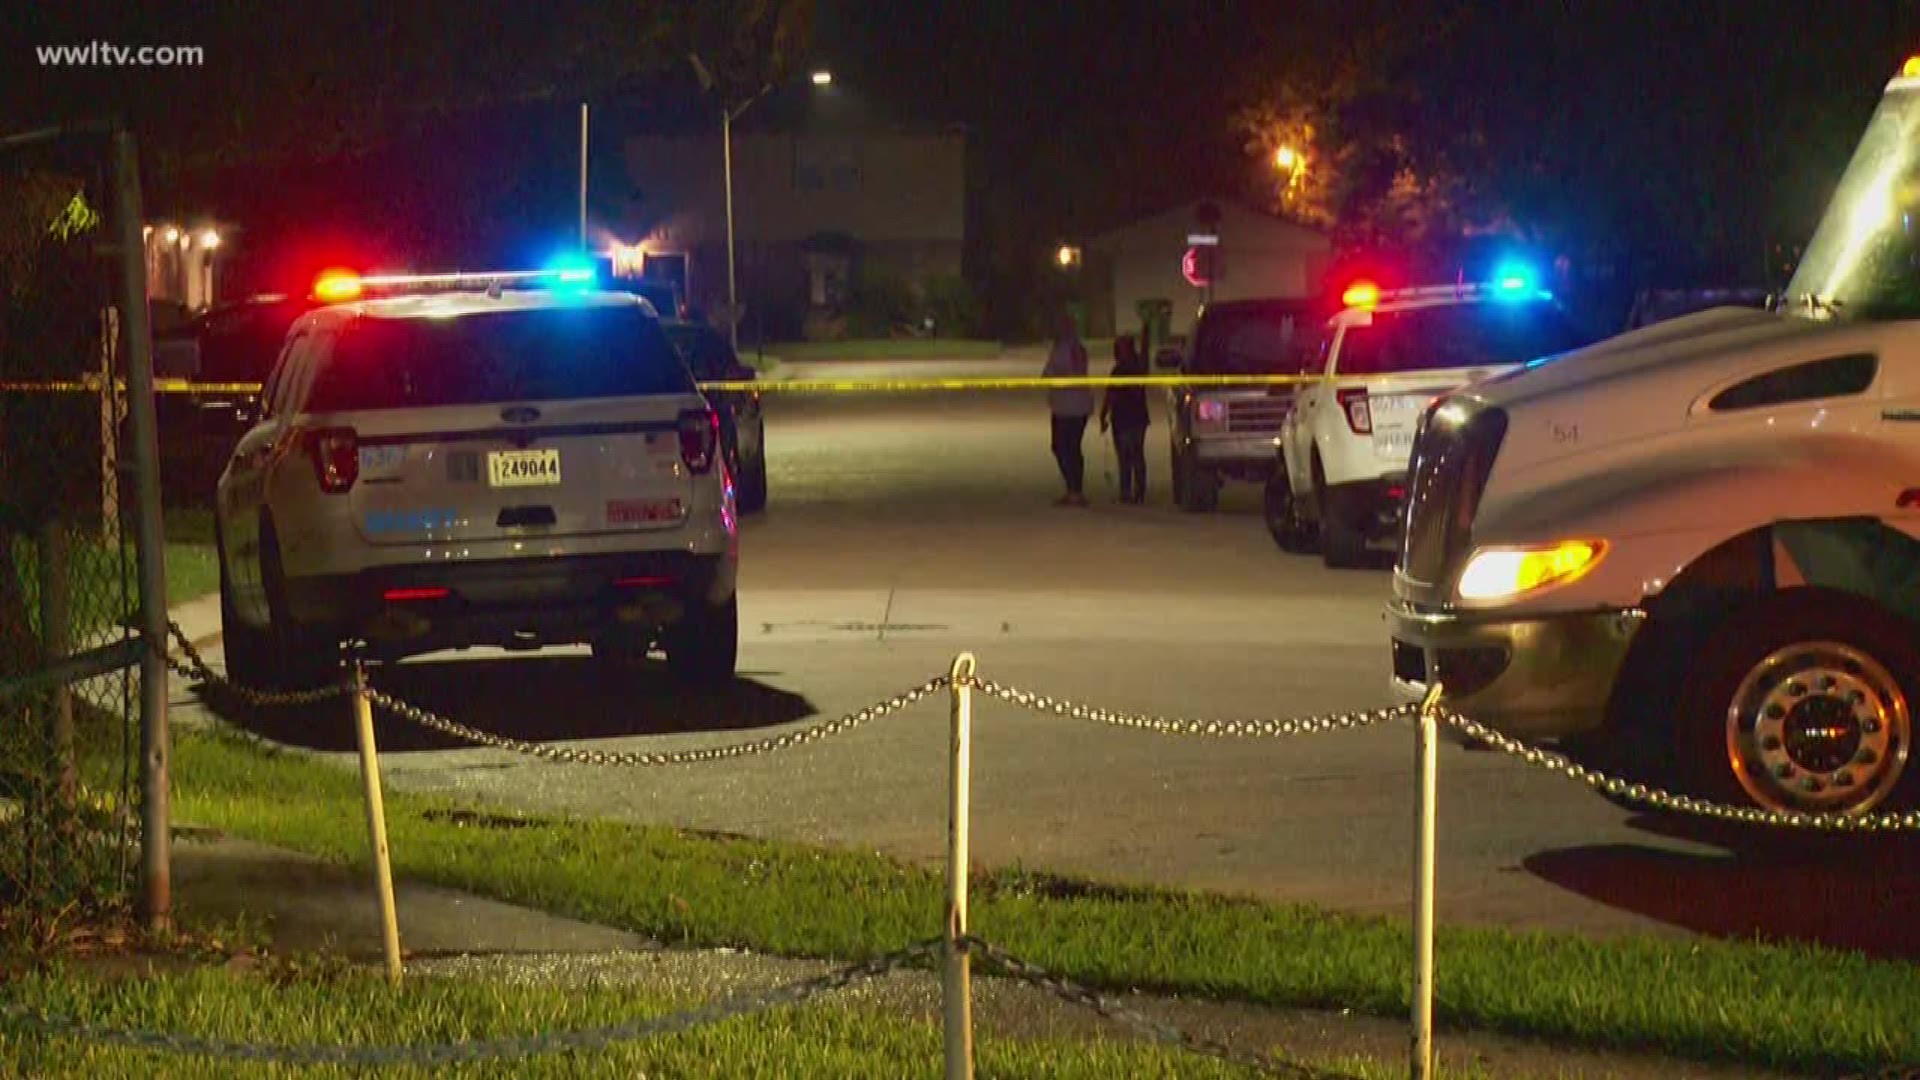 The Jefferson Parish Sheriff's Office says the shooting happened just before 9 p.m. in the 6100 block of Ray Street.